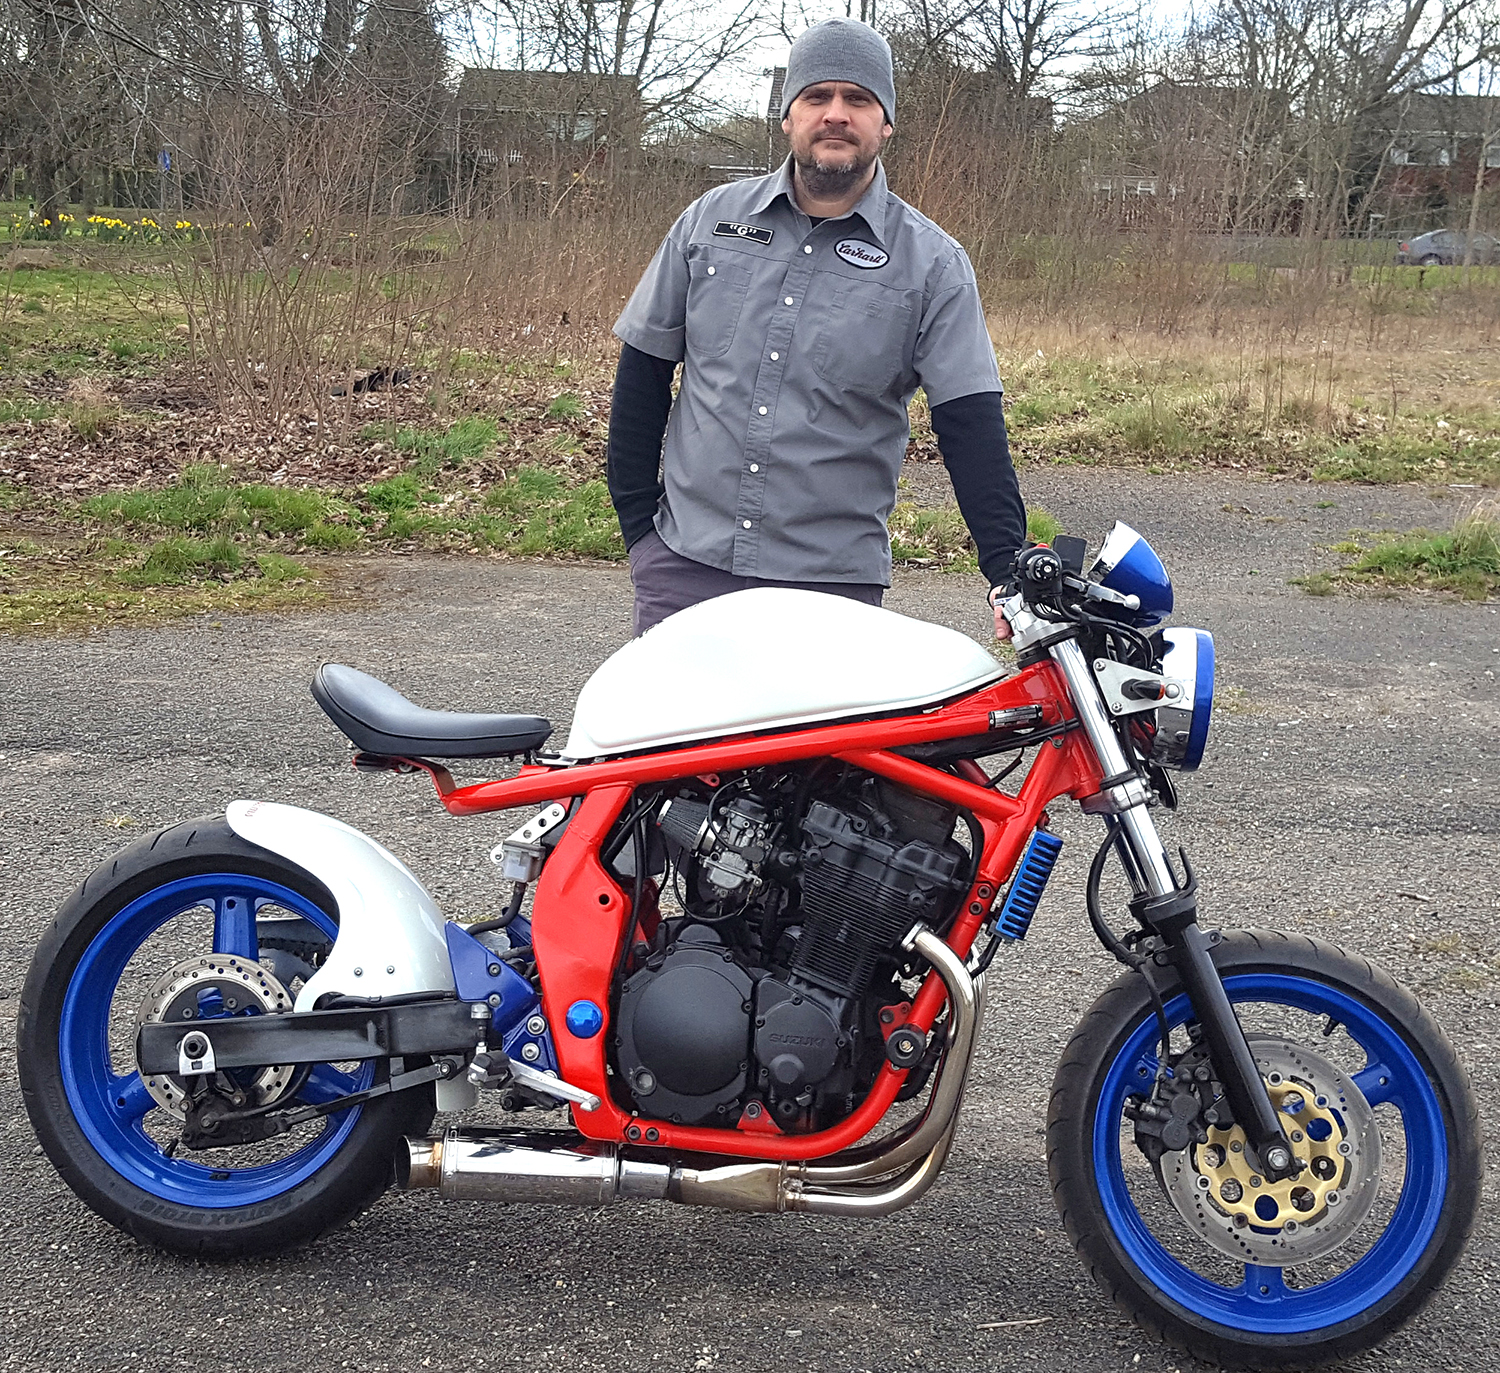 Newtonian Builds Bike for Charity